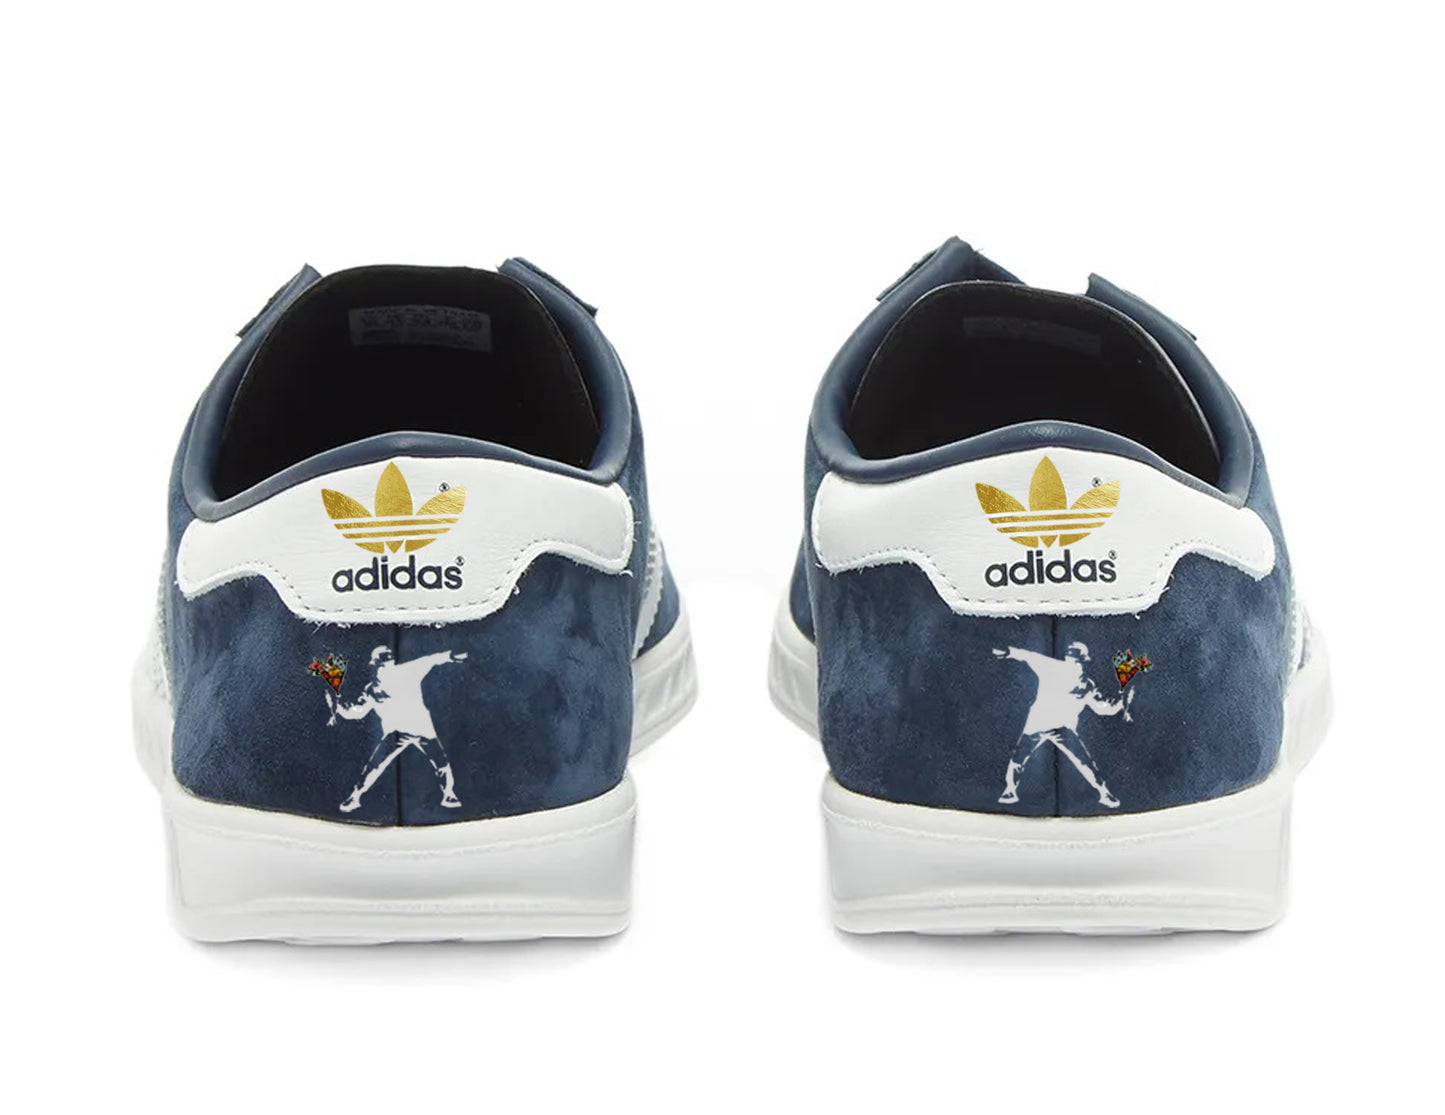 Limited edition Banksy Flower Thrower blue/ white/ gold Adidas custom Hamburg trainers / sneakers